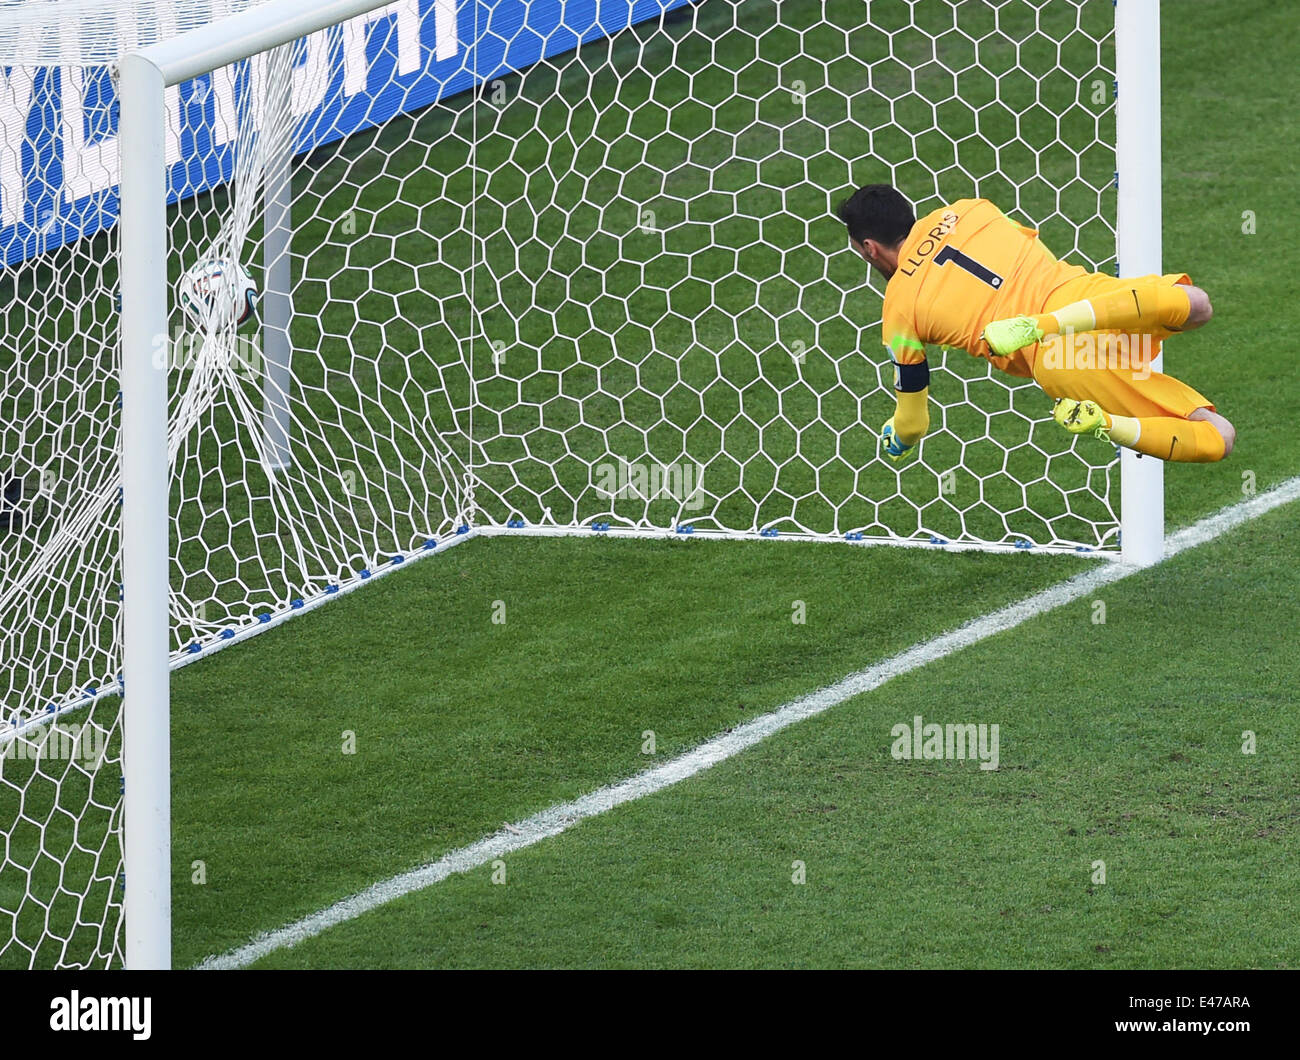 Rio de Janeiro, Brazil. 04th July, 2014. Goalkeeper Hugo Lloris of France can't reach the ball for the 0-1 goal during the FIFA World Cup 2014 quarter final soccer match between France and Germany at Estadio do Maracana in Rio de Janeiro, Brazil, 04 July 2014. Photo: Marcus Brandt/dpa/Alamy Live News Stock Photo